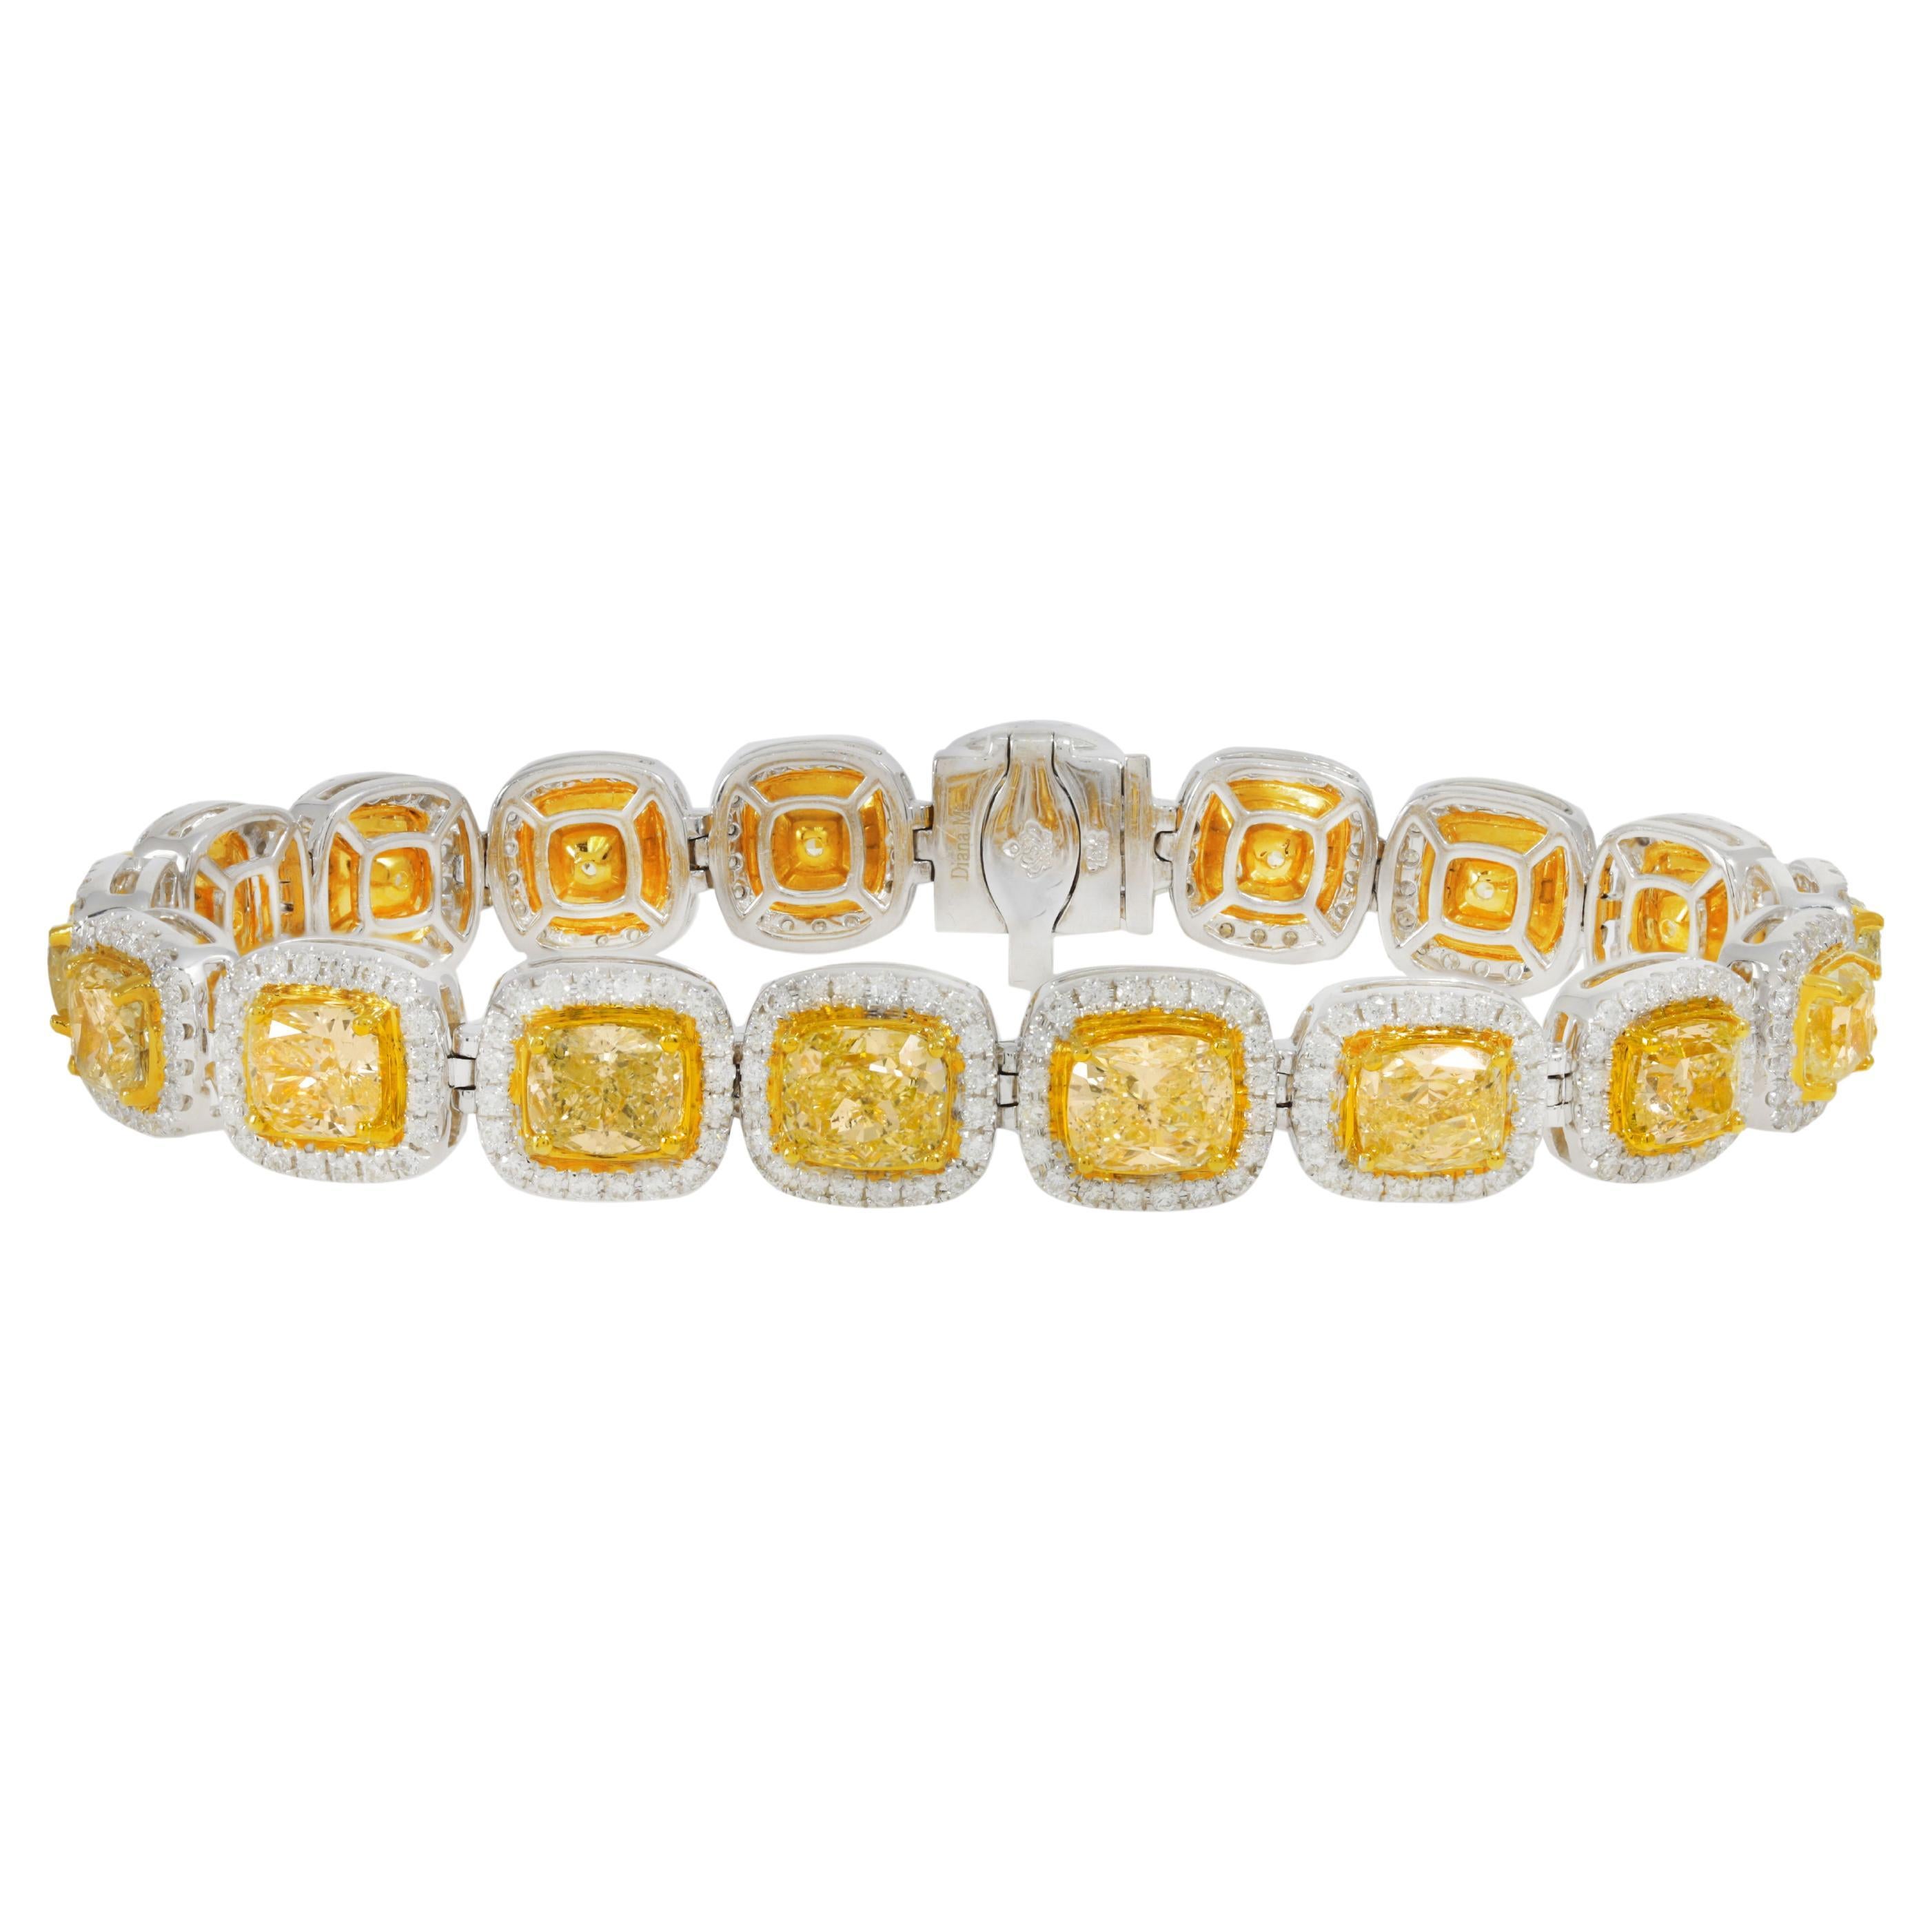 Diana M. Diamond fashion braclet featuring 21.20cts of custion cut fancy yellows